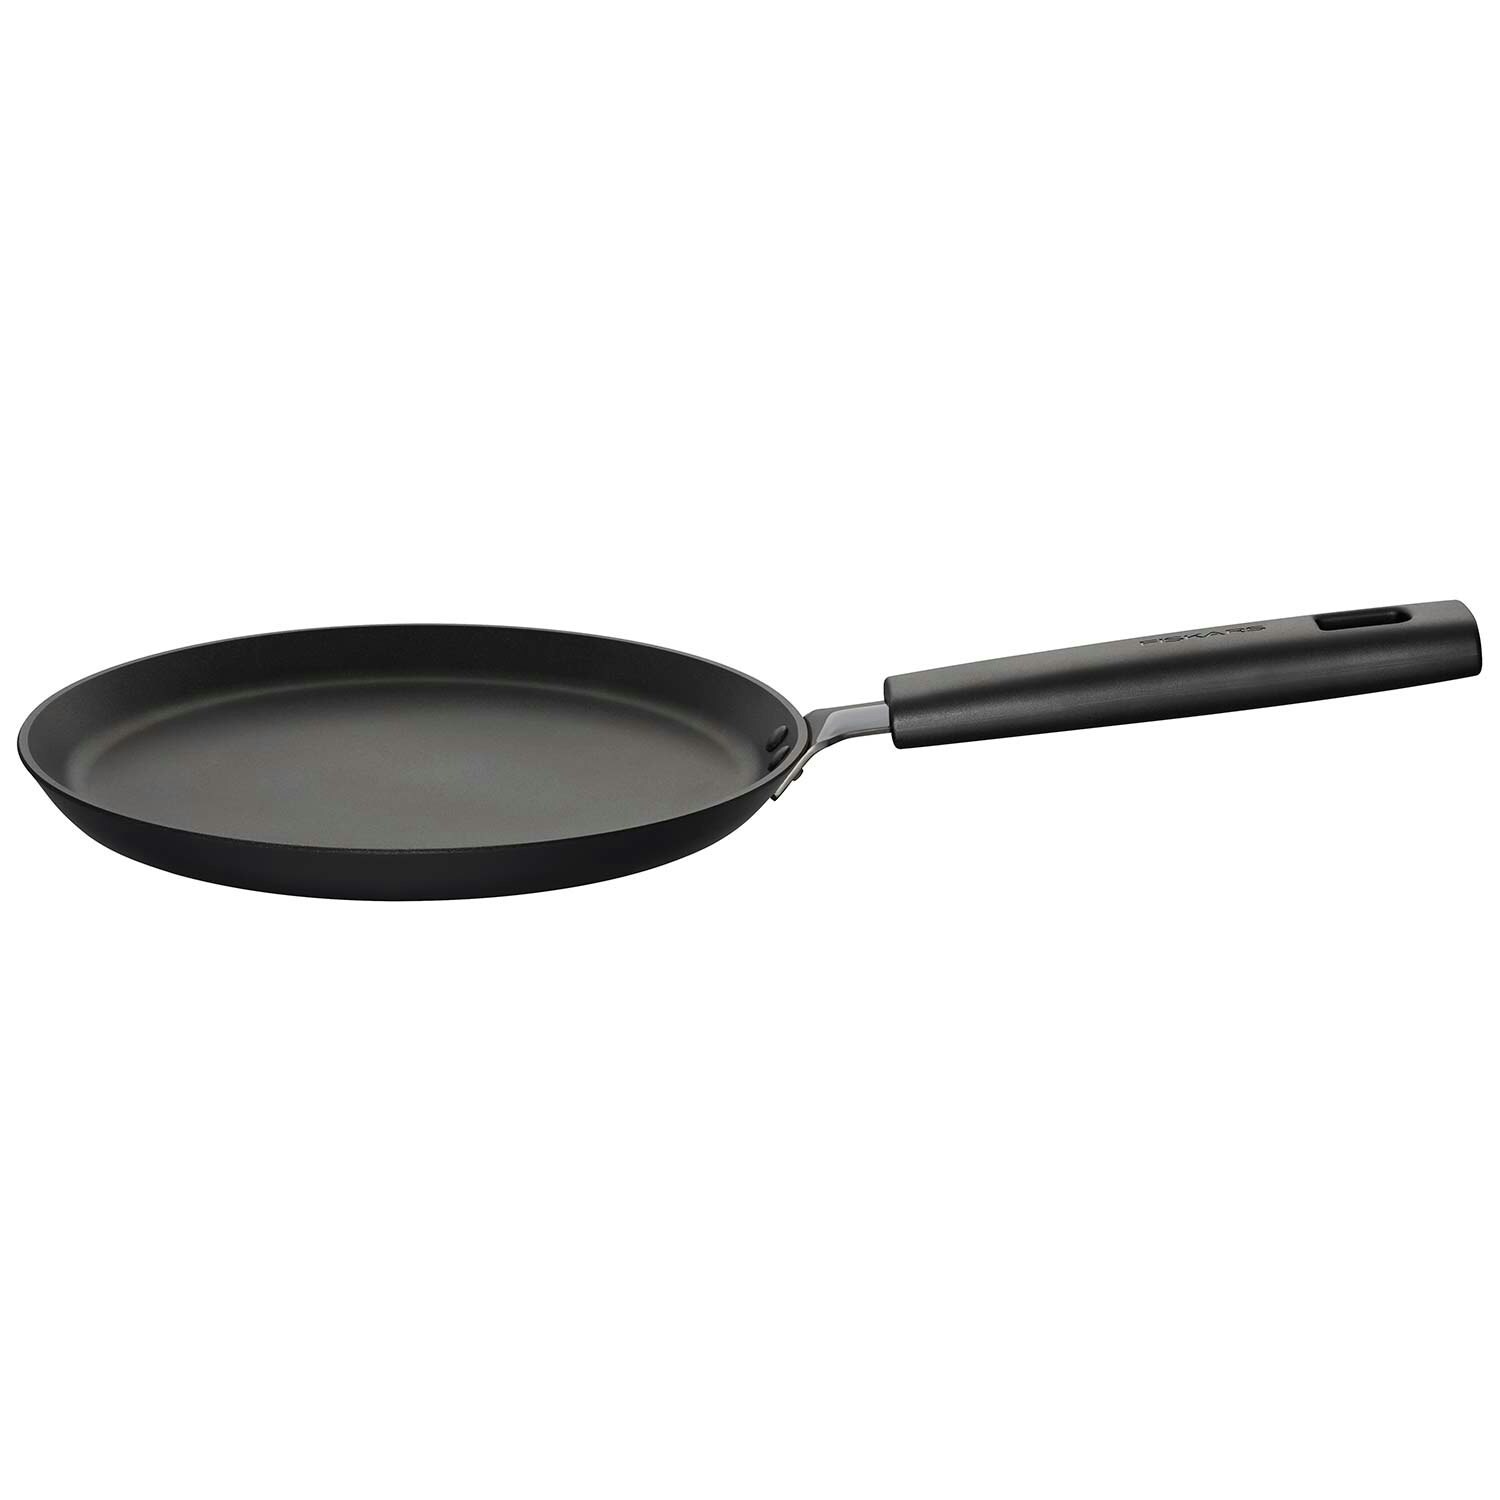 double-sided frying pans cooker 30cm non-stick pancake pan